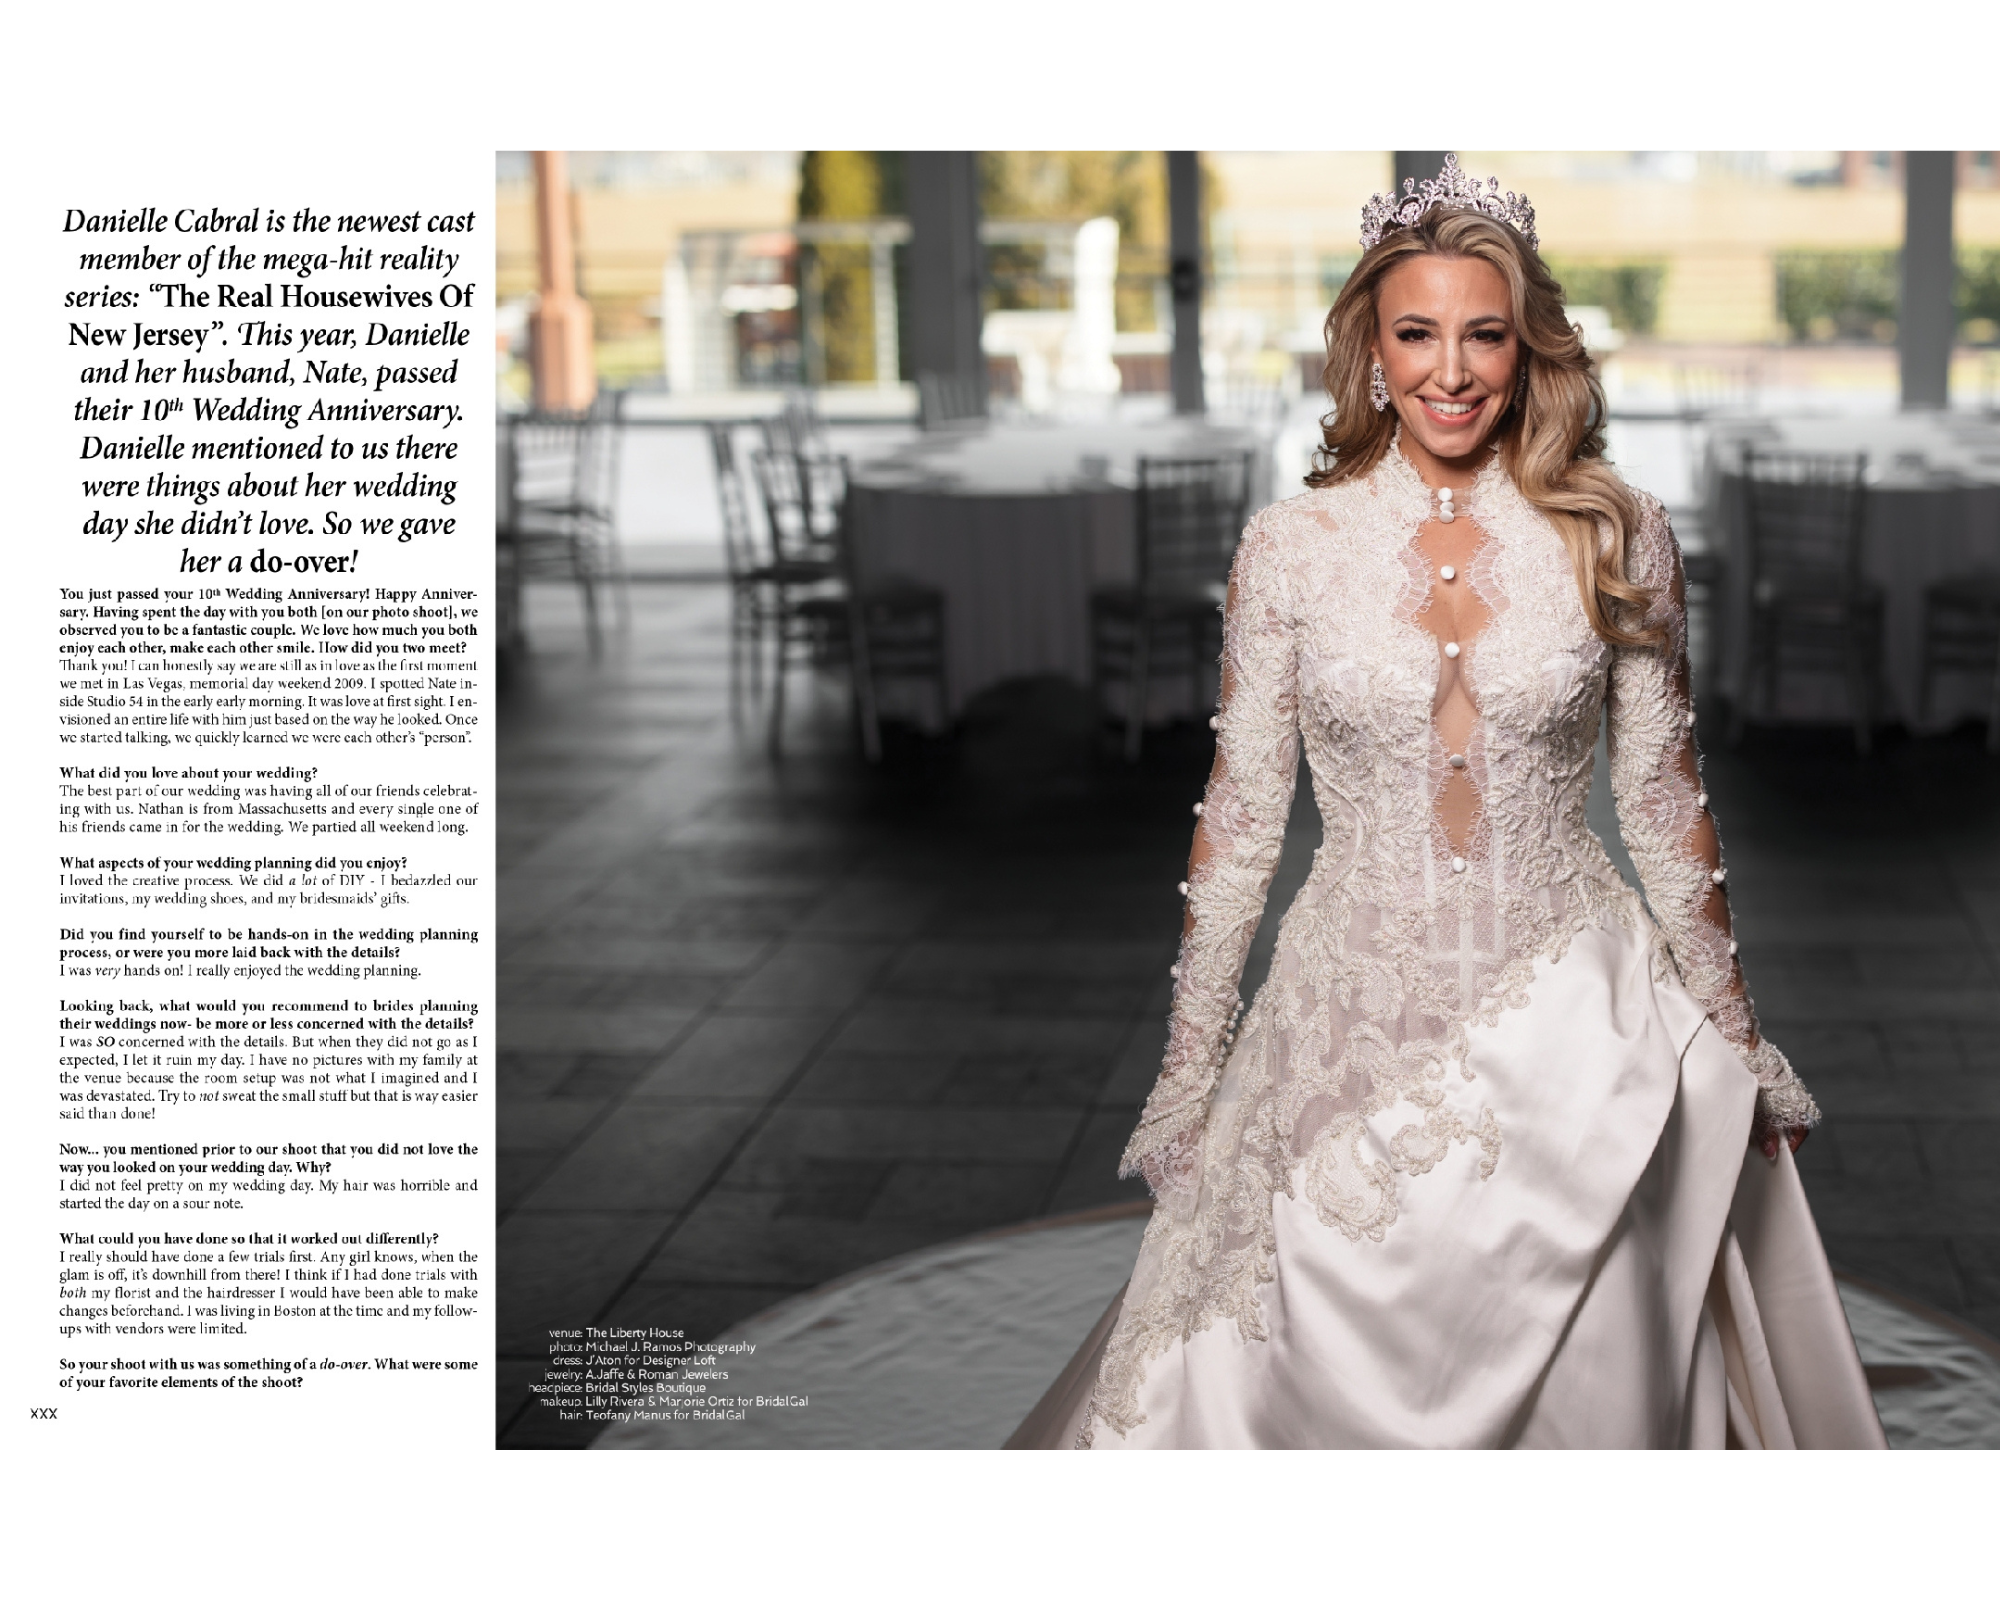 RHONJ Star Danielle Cabral 10th-anniversary shoot for Sophisticated weddings! Danelle’s gorgeous Swarovski crystal bridal crown was from Bridal Styles Boutique, and her wedding gown by J'Aton Designer Loft. 